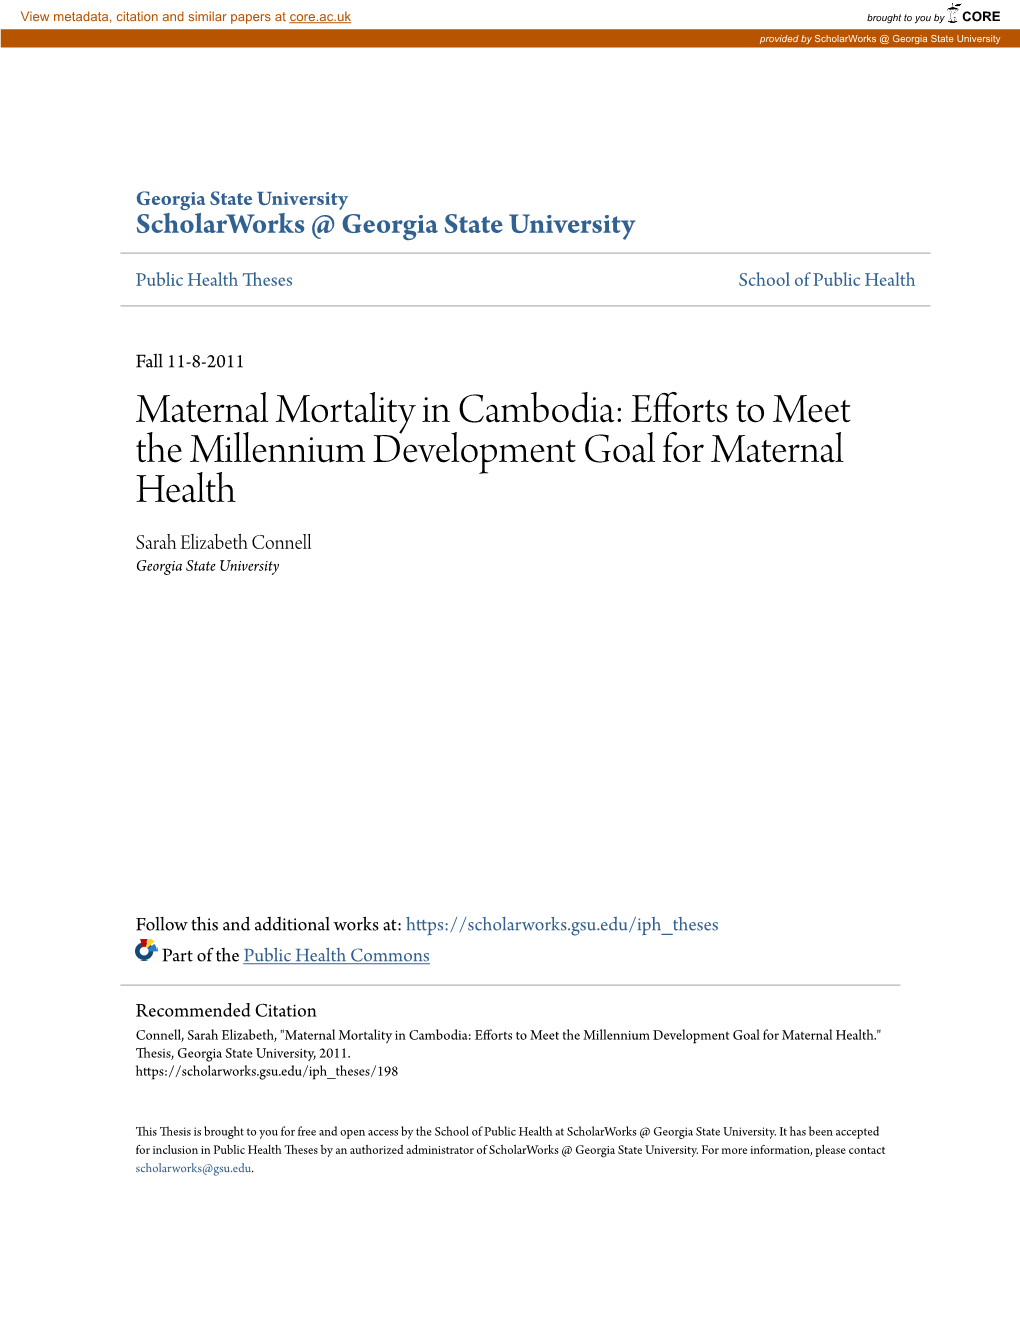 Maternal Mortality in Cambodia: Efforts to Meet the Millennium Development Goal for Maternal Health Sarah Elizabeth Connell Georgia State University